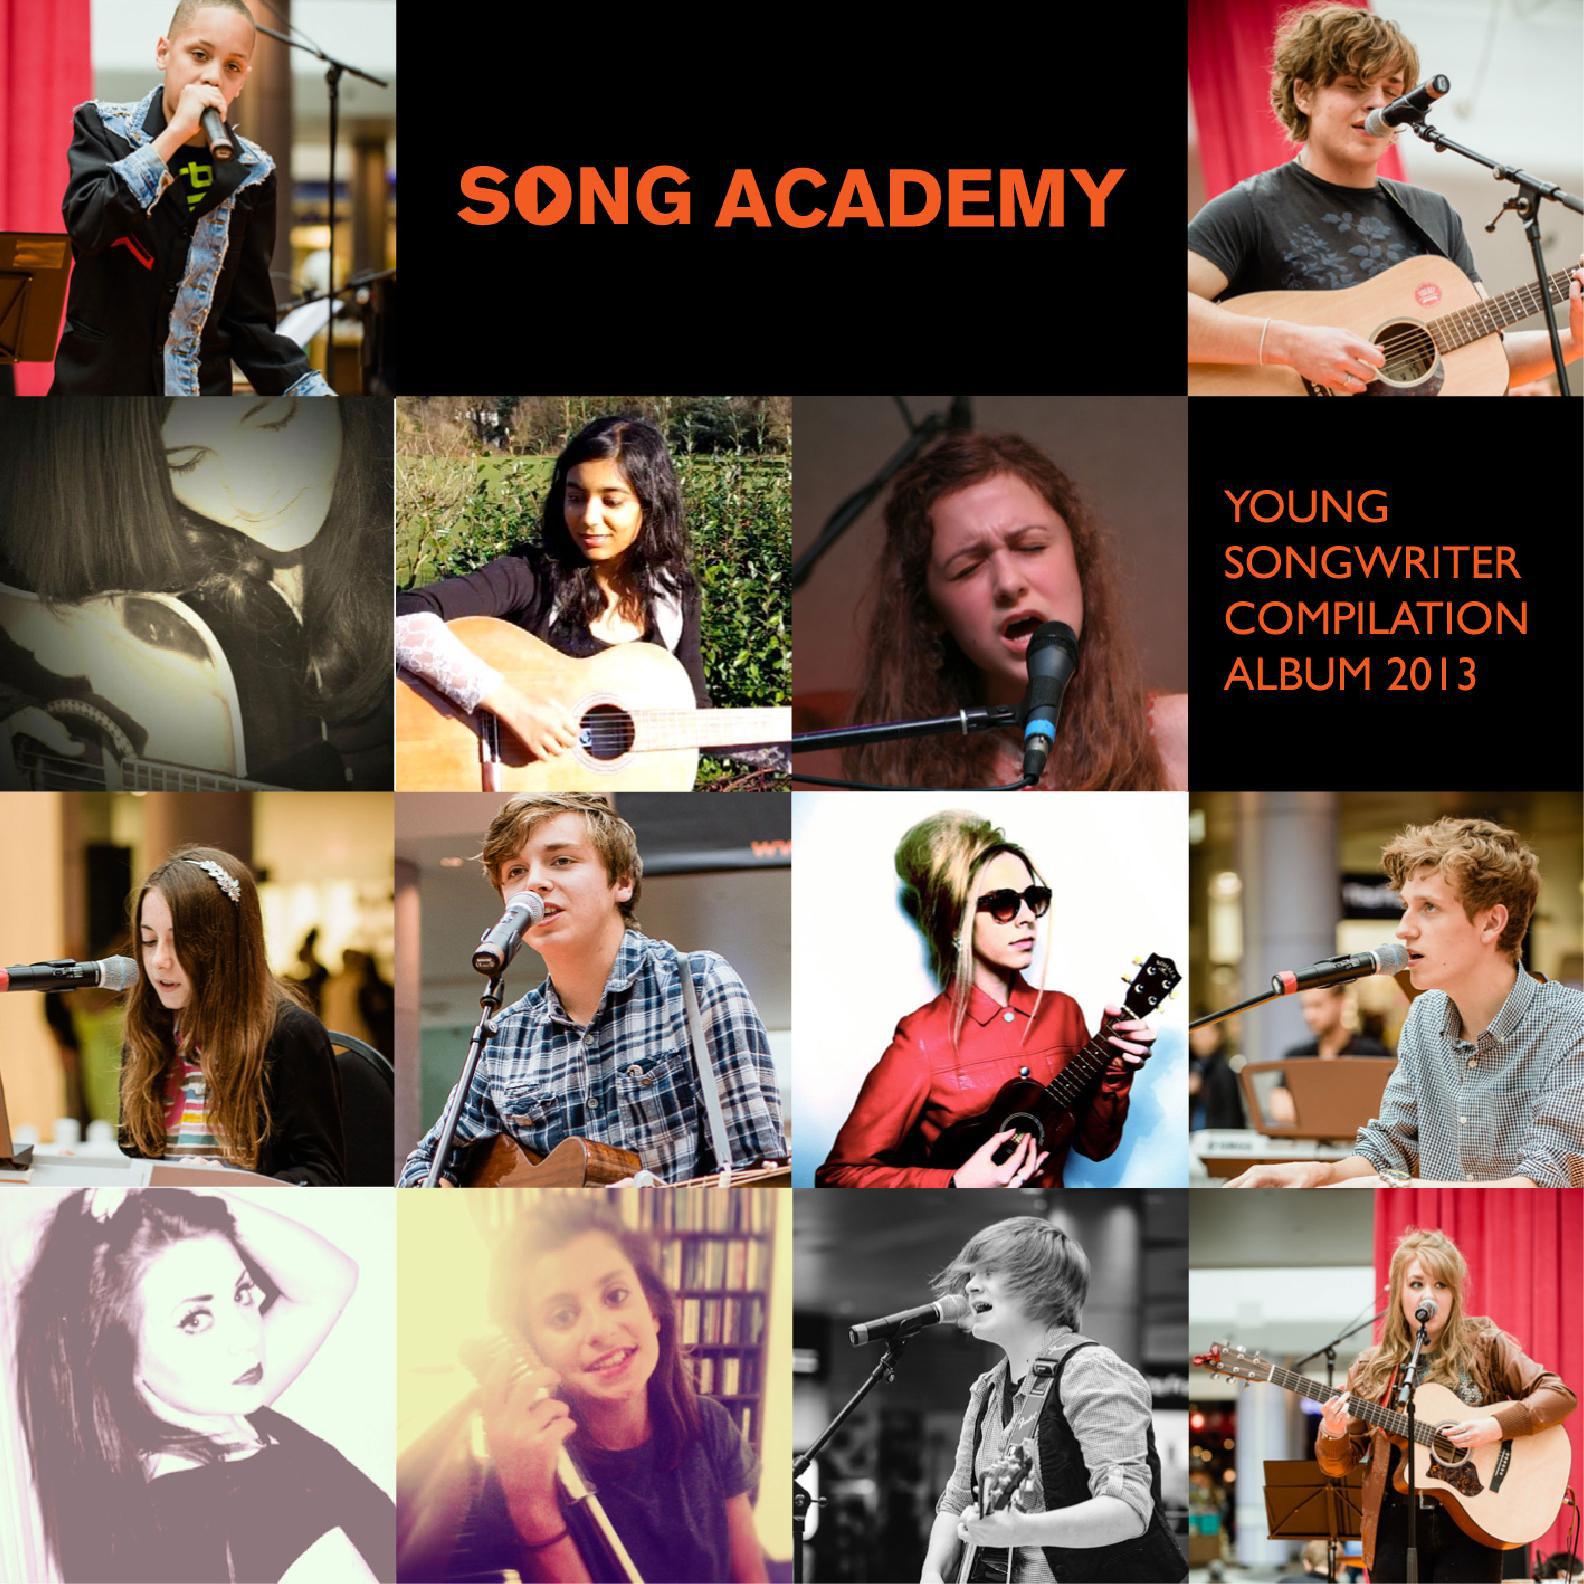 The Young Songwriter 2013 Competition Album